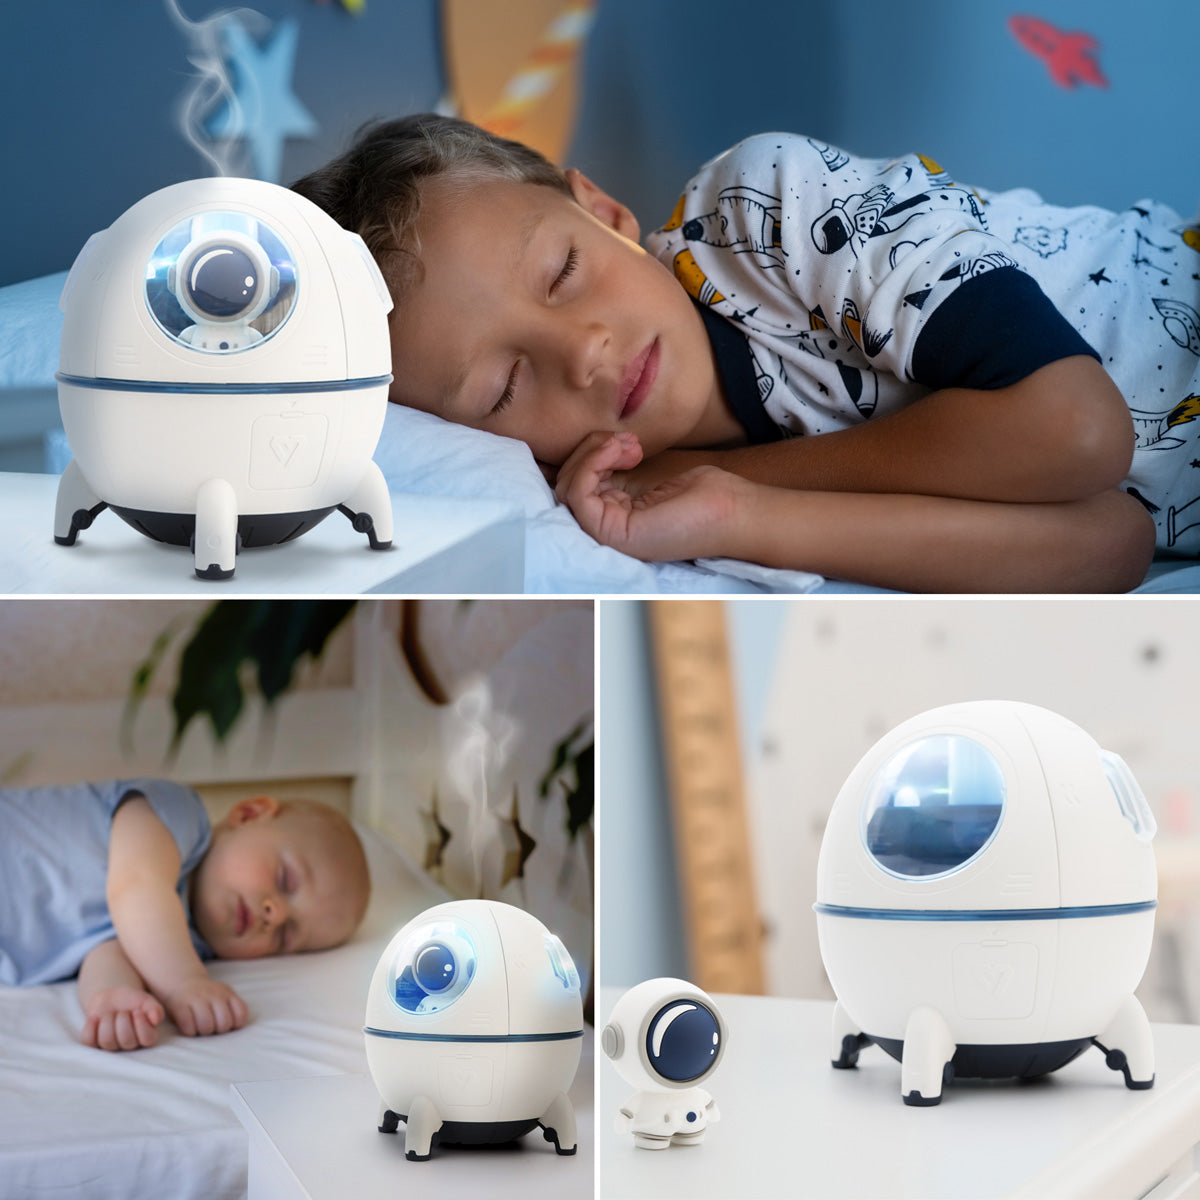 Spaceship Explorer Child's Essential Oil Diffuser, Humidifier and Night Light